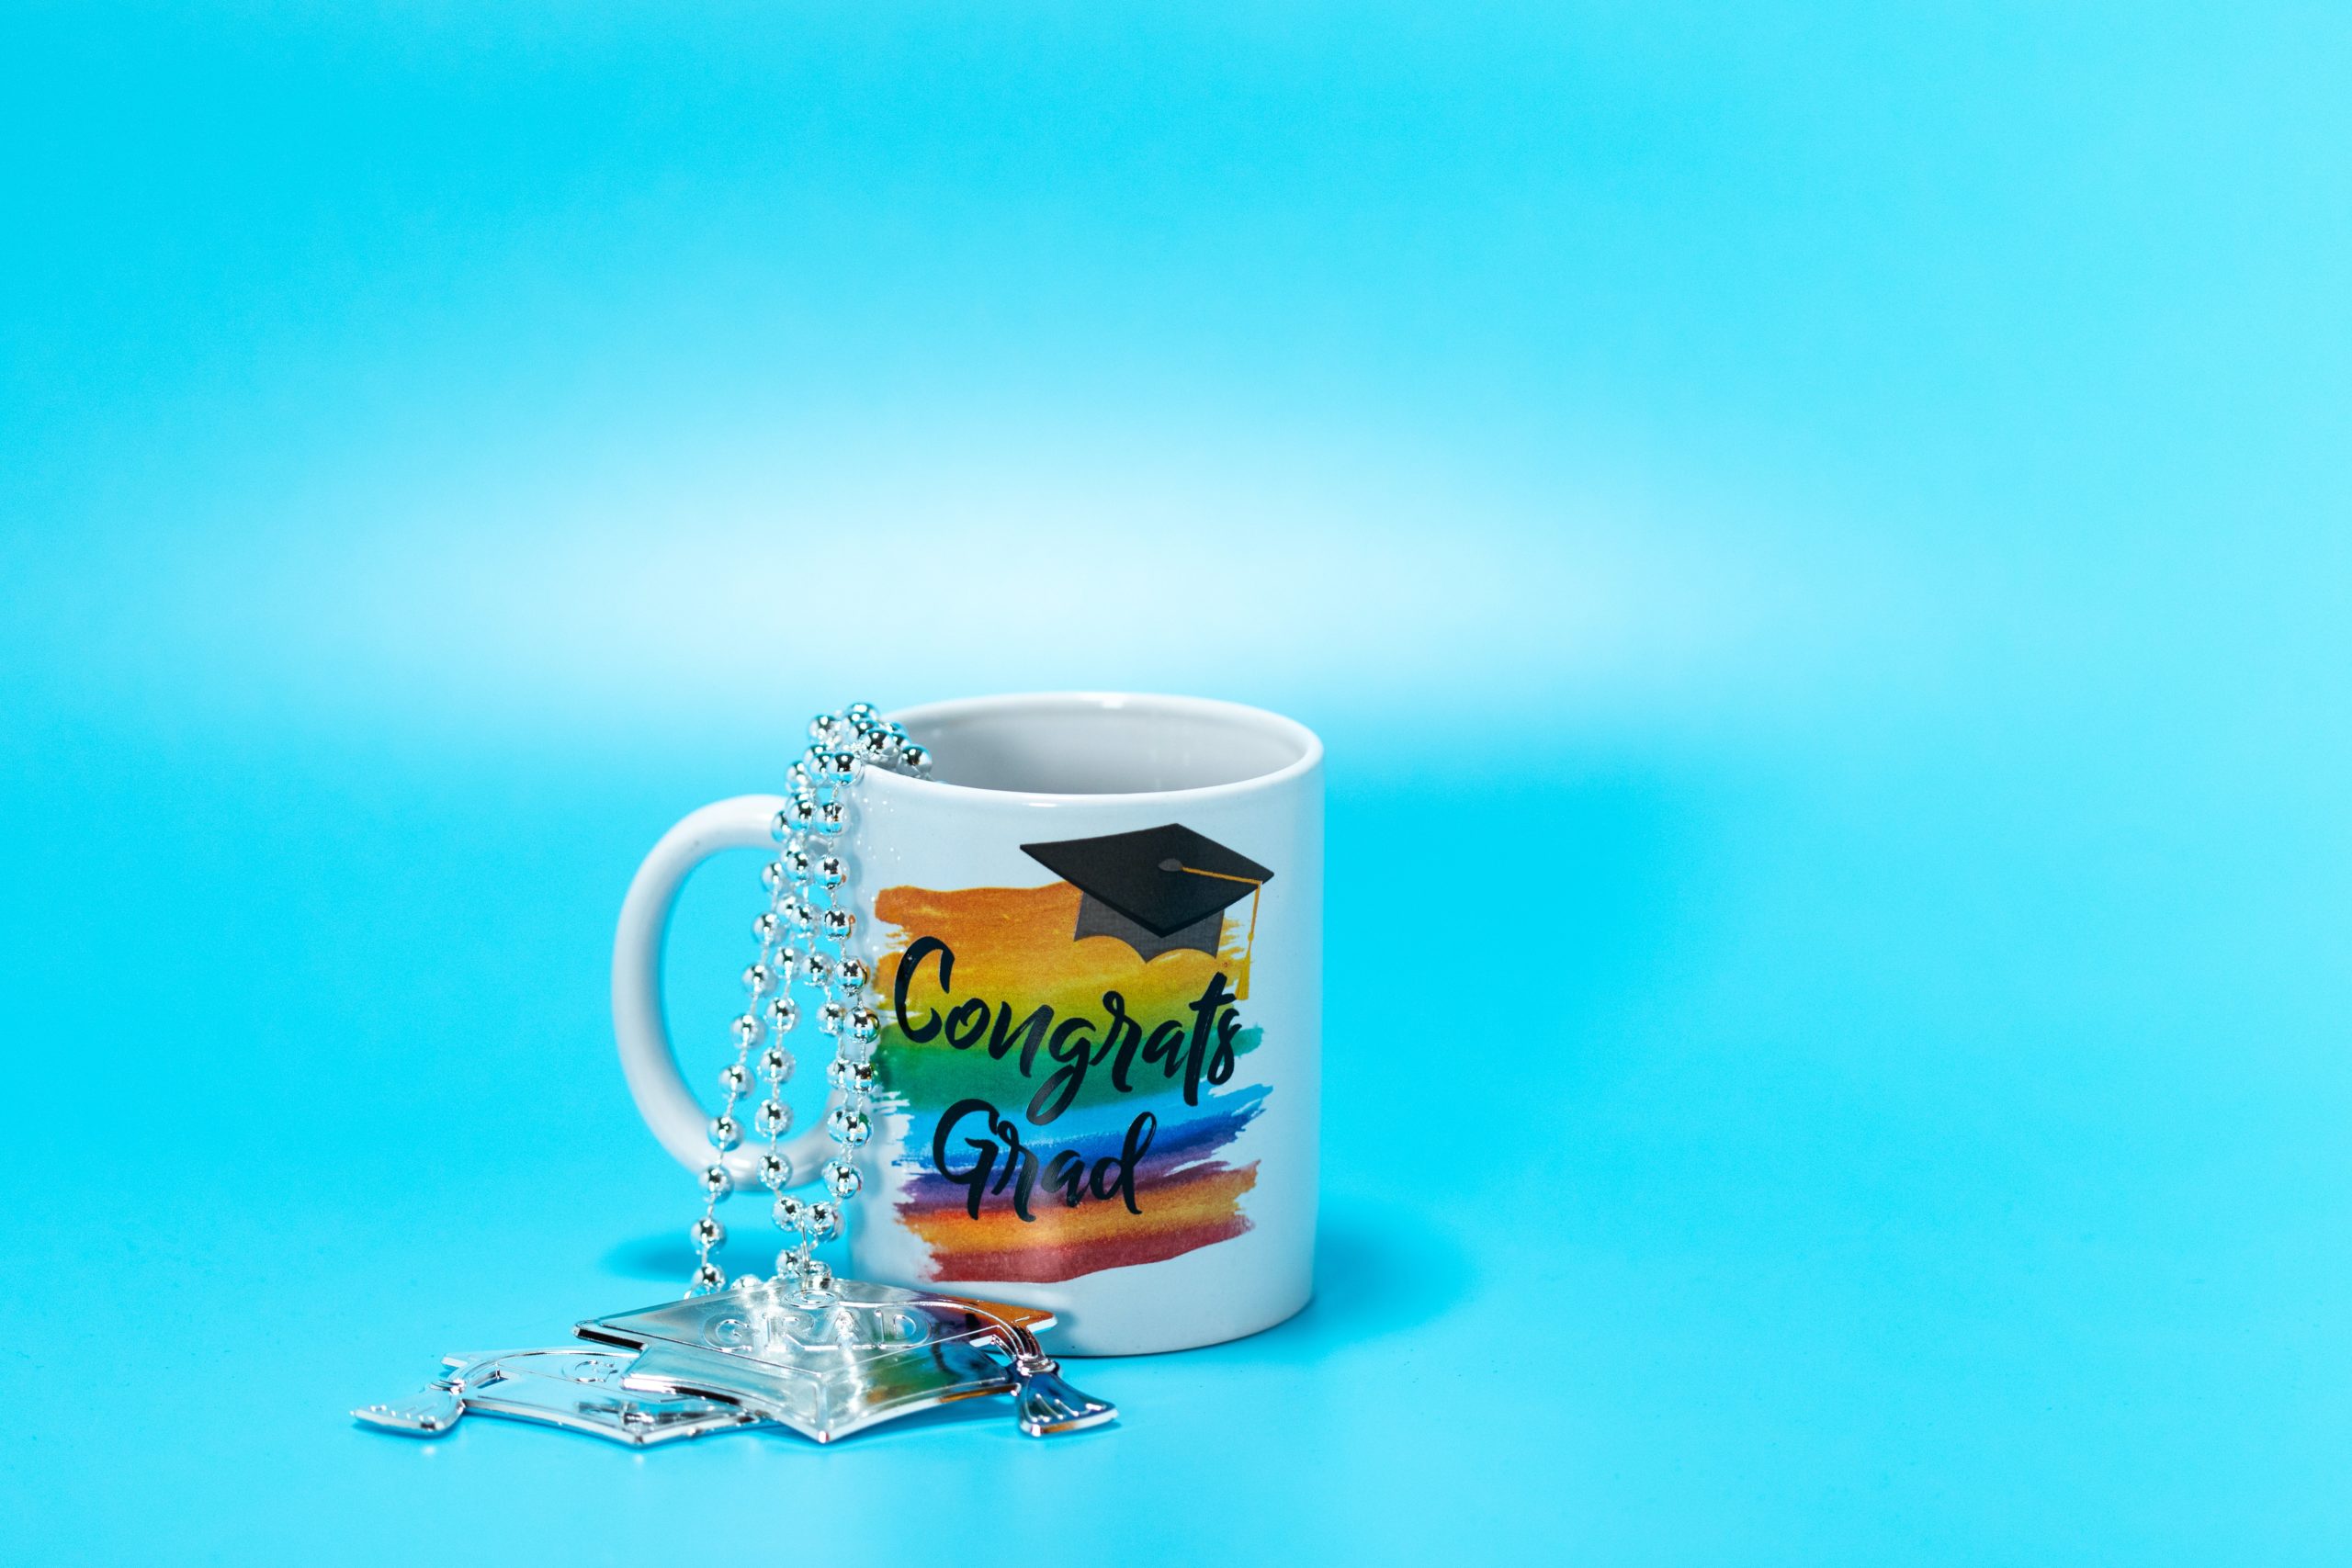 A photo of a coffee mug with the words "Congrats Grad" written on the side.